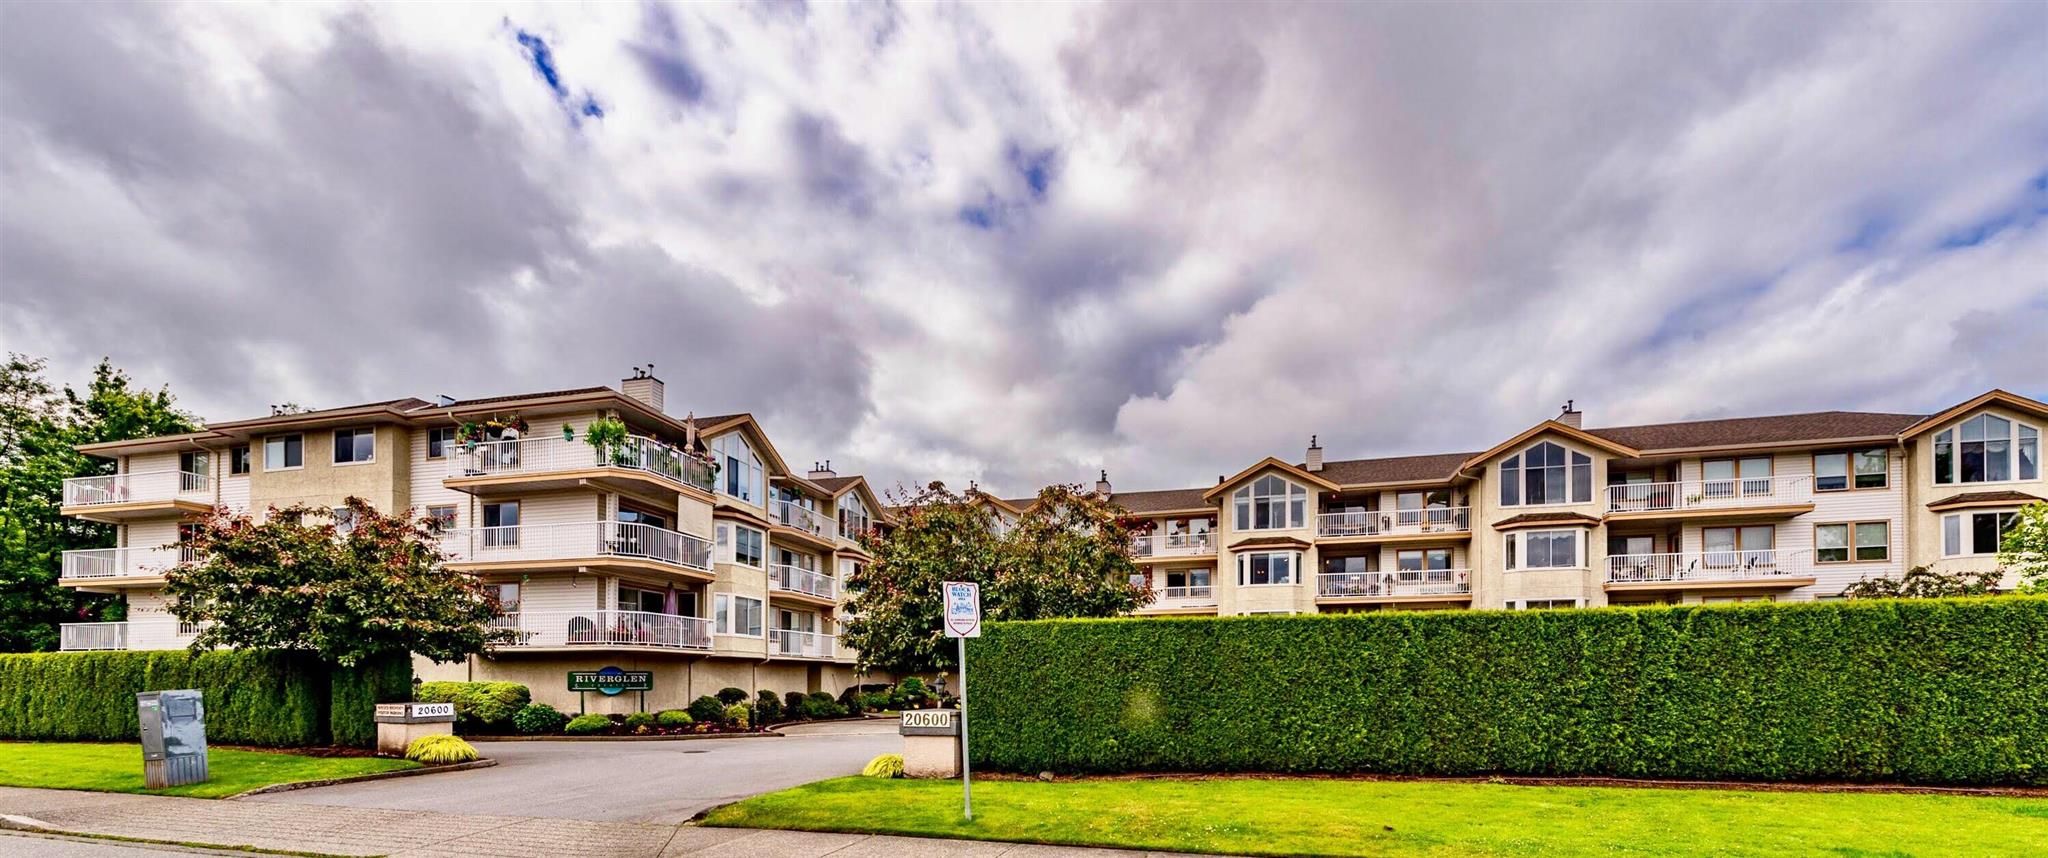 Main Photo: 213 20600 53A Avenue in Langley: Langley City Condo for sale : MLS®# R2593027